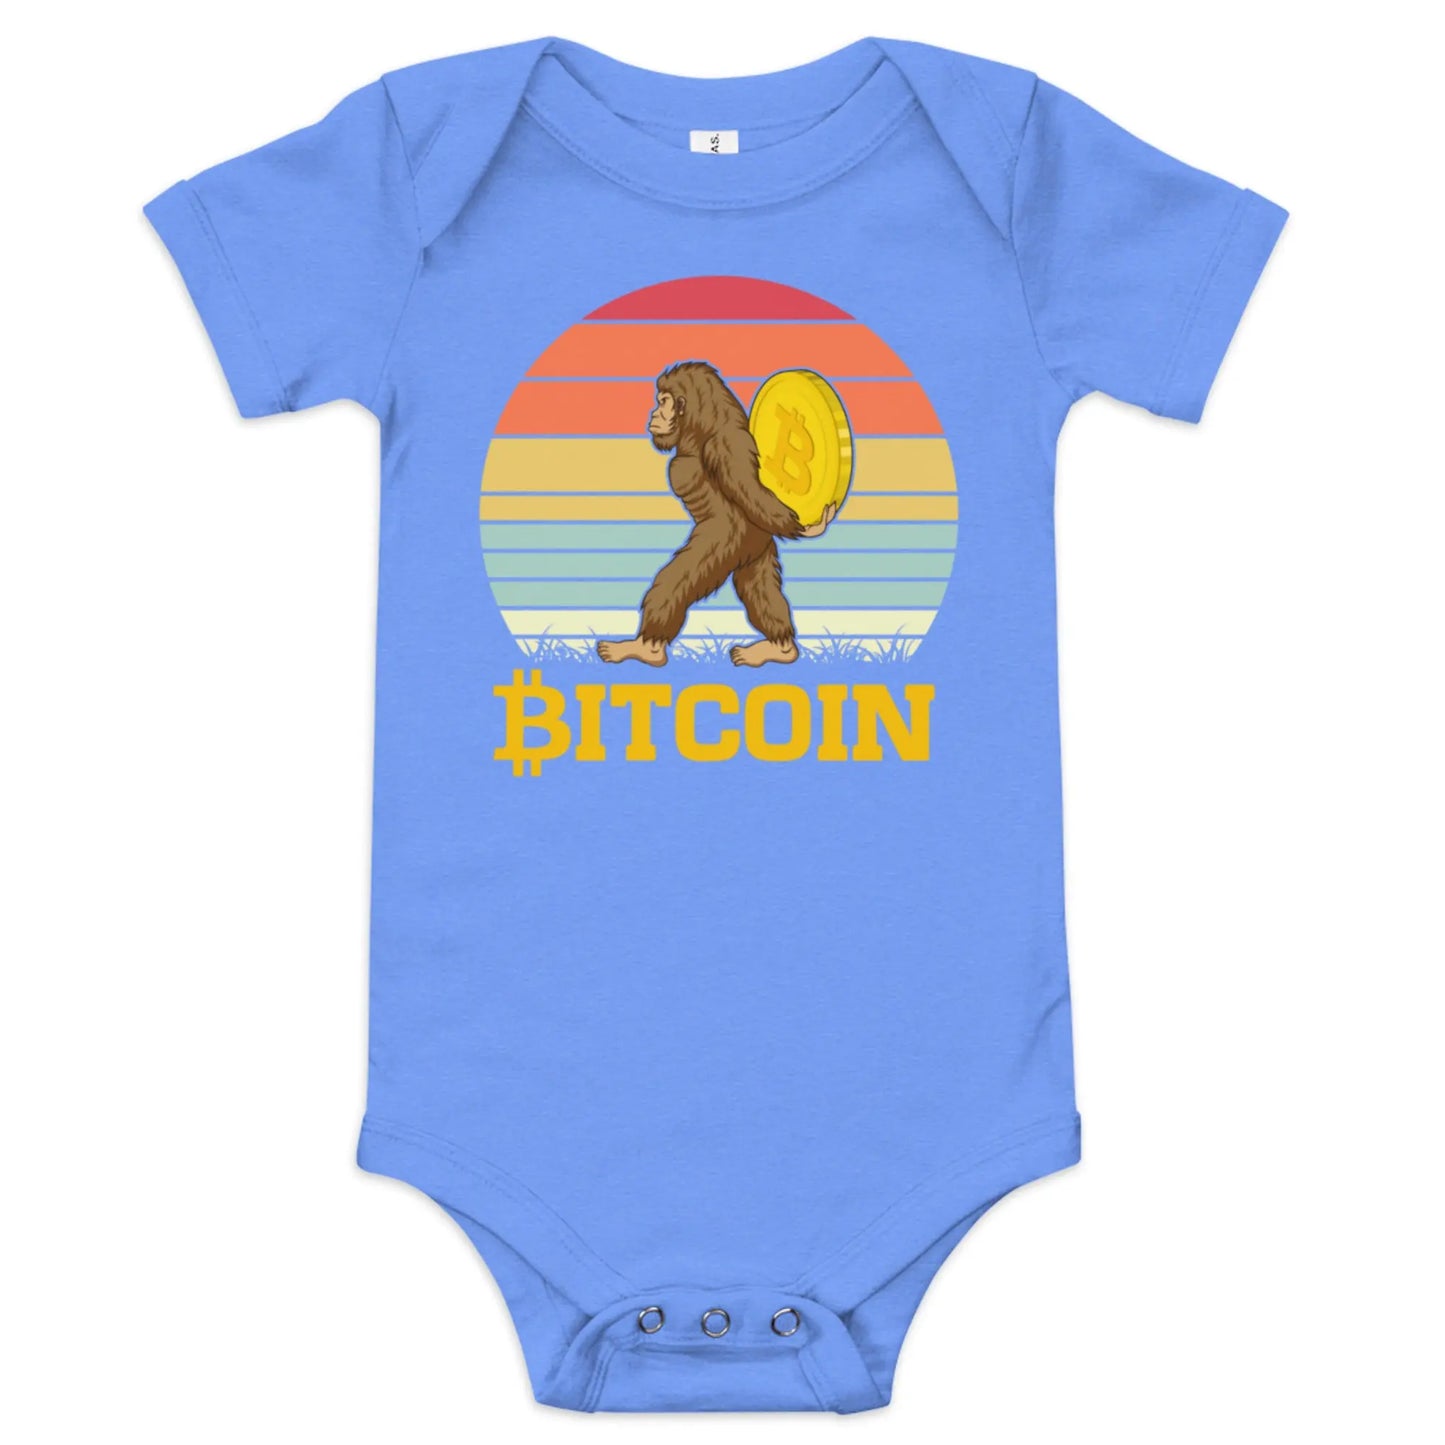 Big Foot - Baby Bitcoin Body Suit - One Piece with Short Sleeve Blue